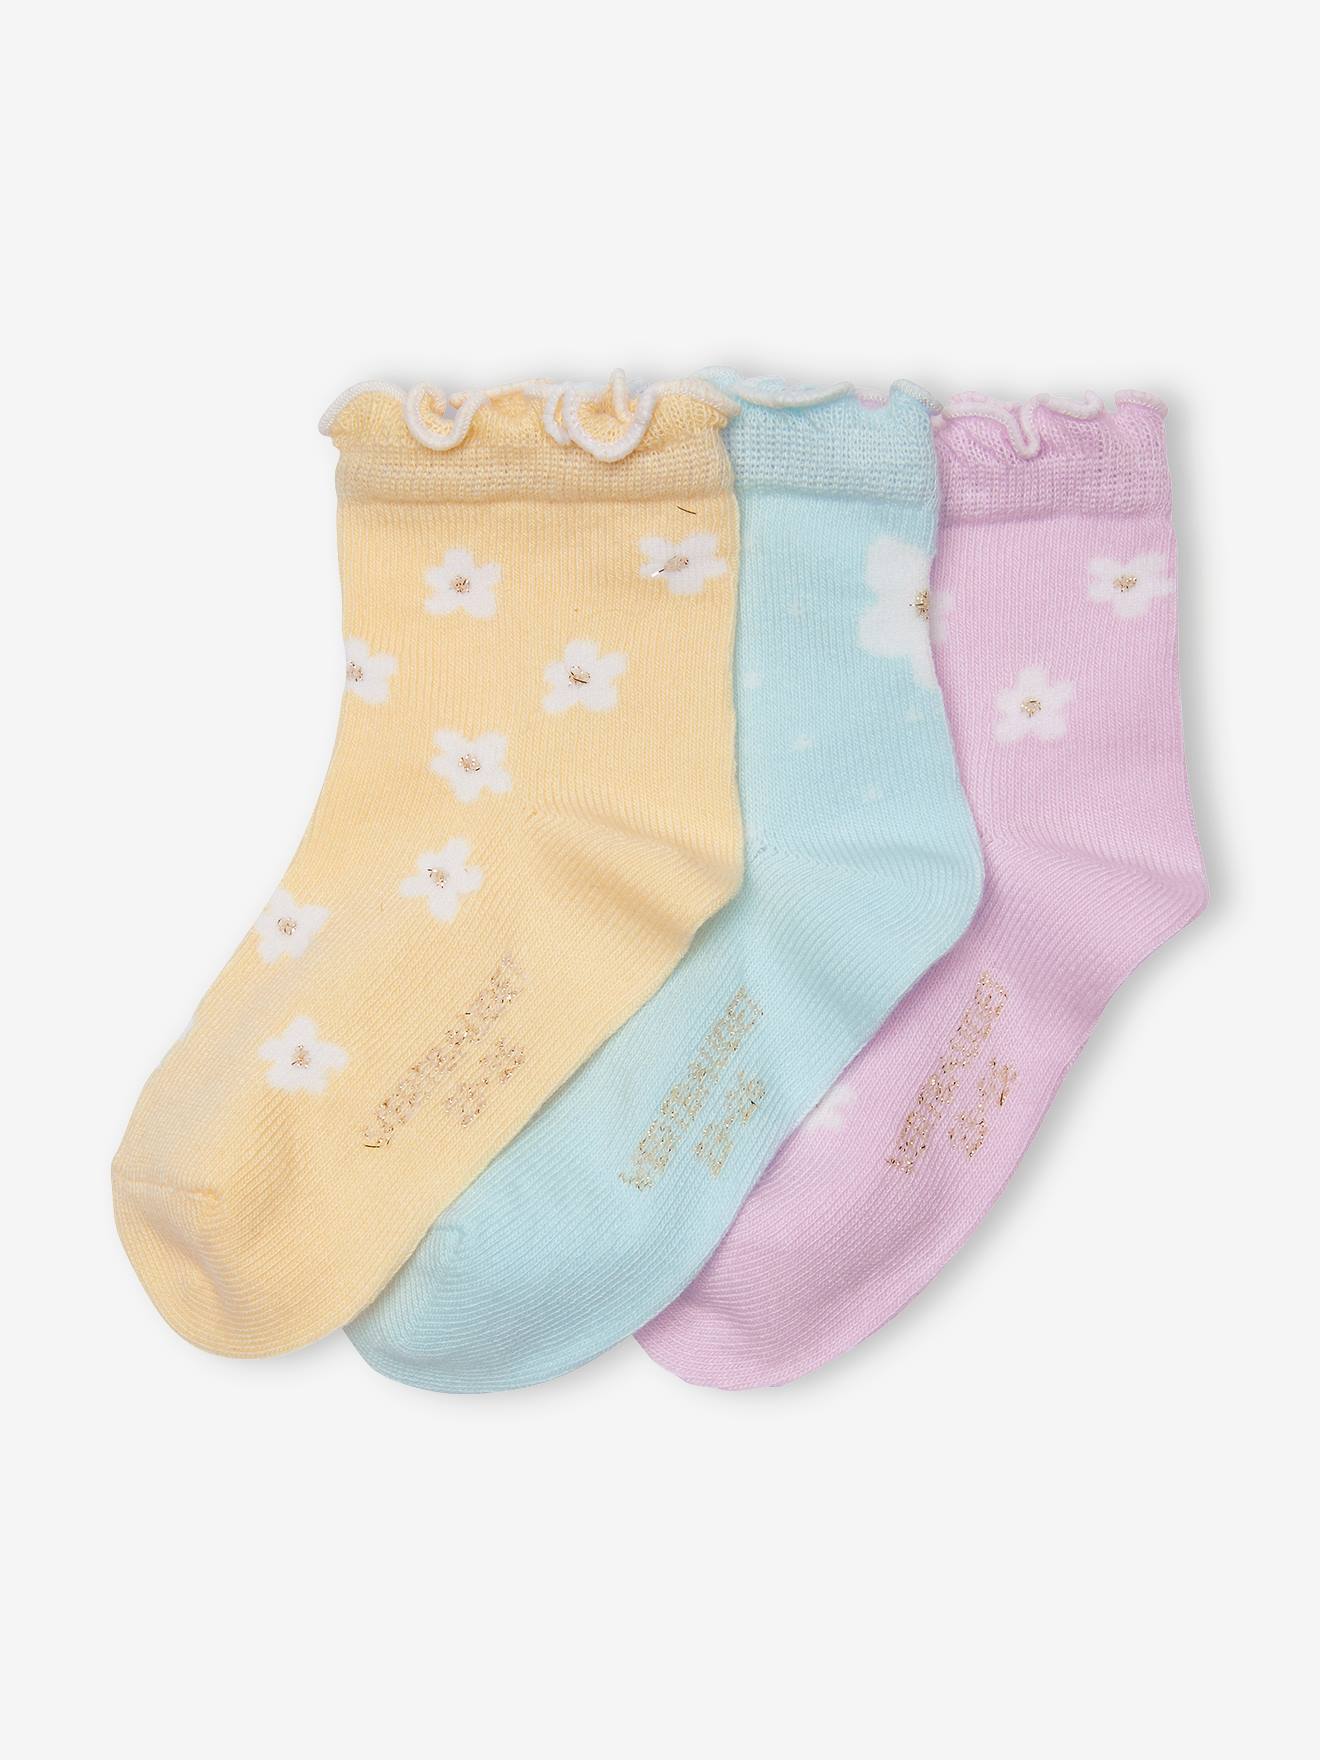 Pack of 3 Pairs of "Daisy" Socks for Baby Girls pale yellow